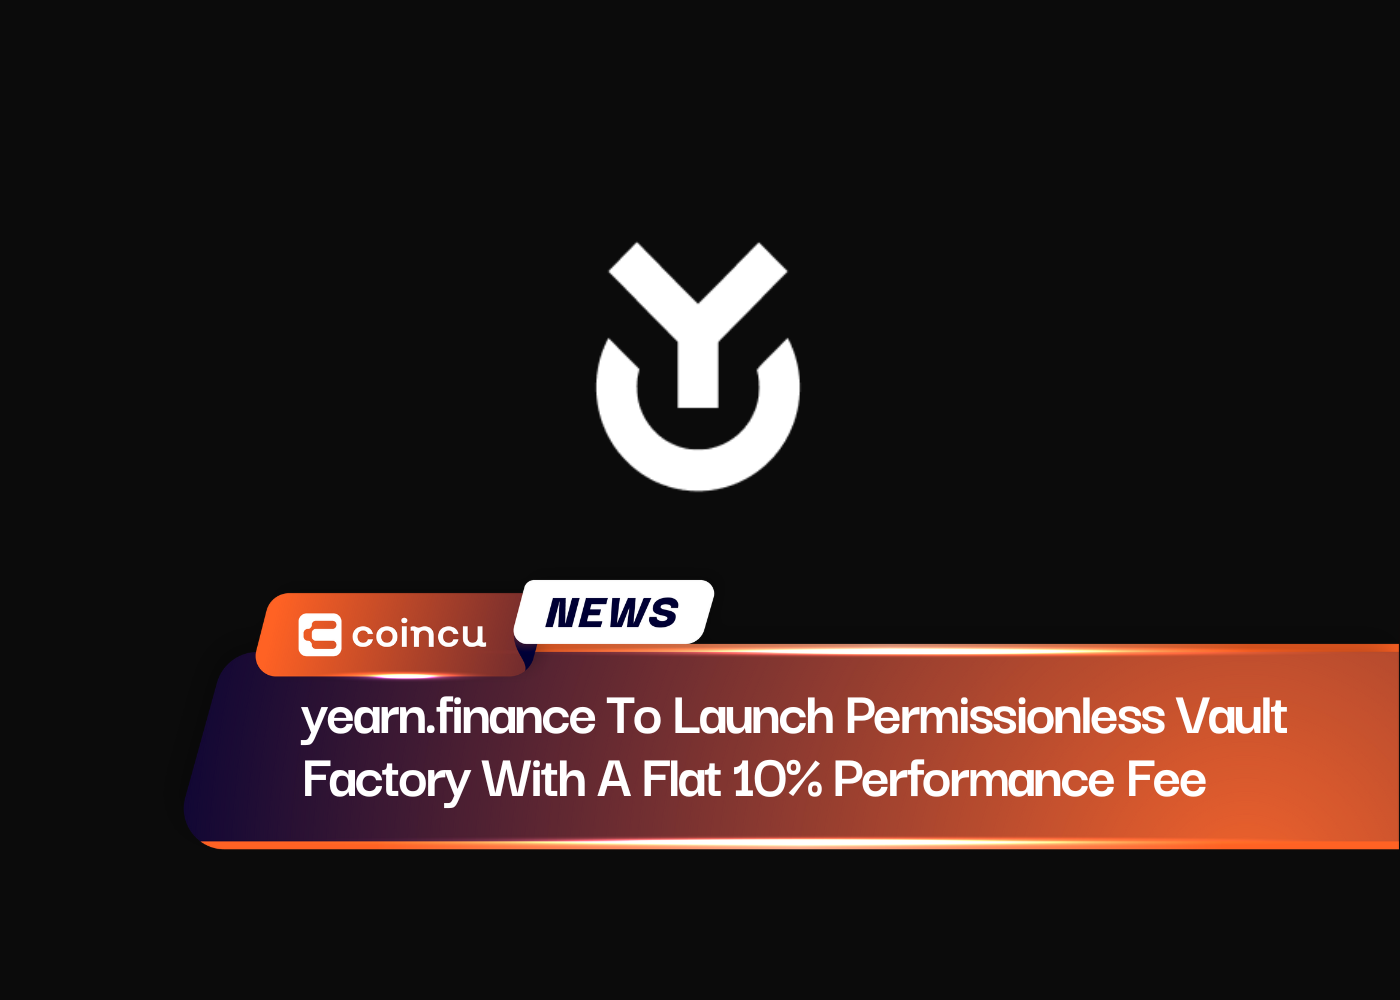 yearn.finance To Launch Permissionless Vault Factory With A Flat 10% Performance Fee